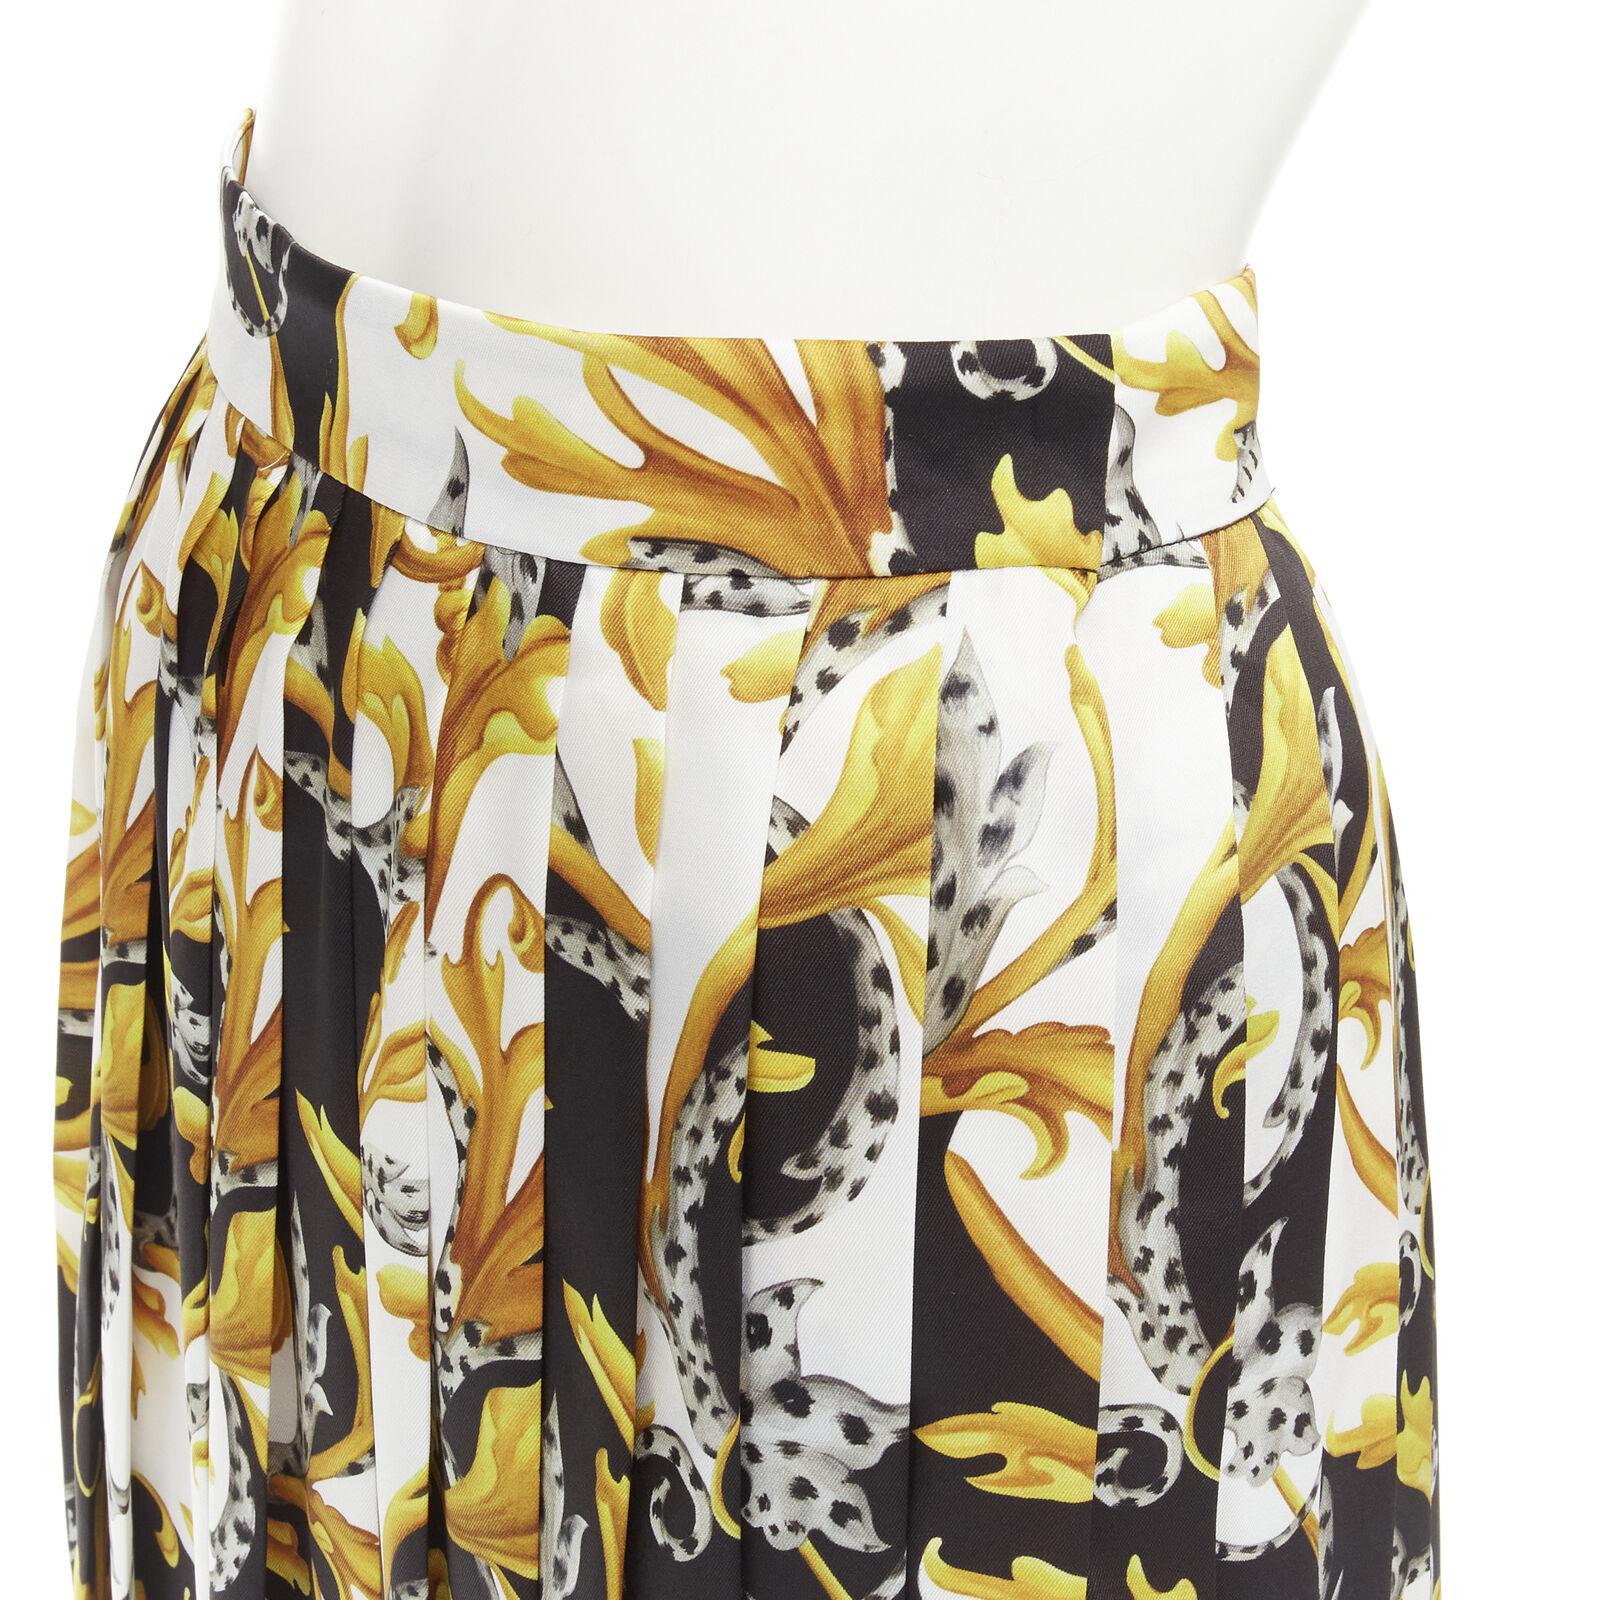 new VERSACE Barocco Acanthus black gold print pleated high slit skirt IT36 XS
Reference: TGAS/C00817
Brand: Versace
Designer: Donatella Versace
Model: A895495 1F01641 5B070
Collection: Barocco Acanthus
Material: Polyester
Color: Black, Gold
Pattern: